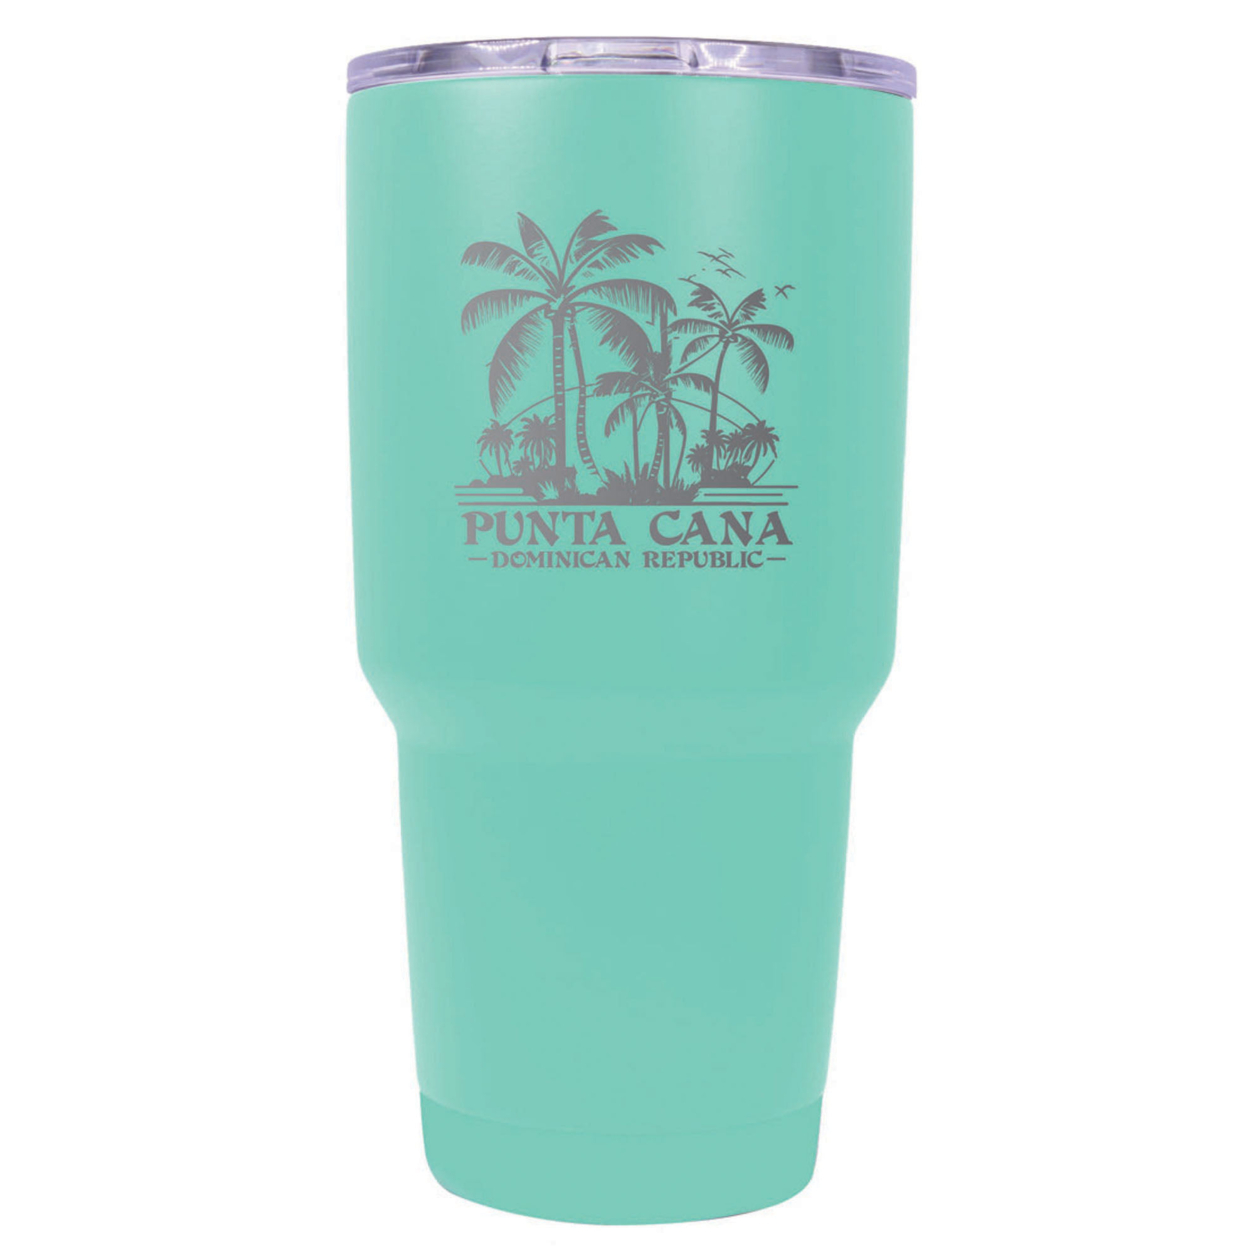 Punta Cana Dominican Republic Souvenir 24 Oz Insulated Stainless Steel Tumbler Etched - Black, PALM BEACH